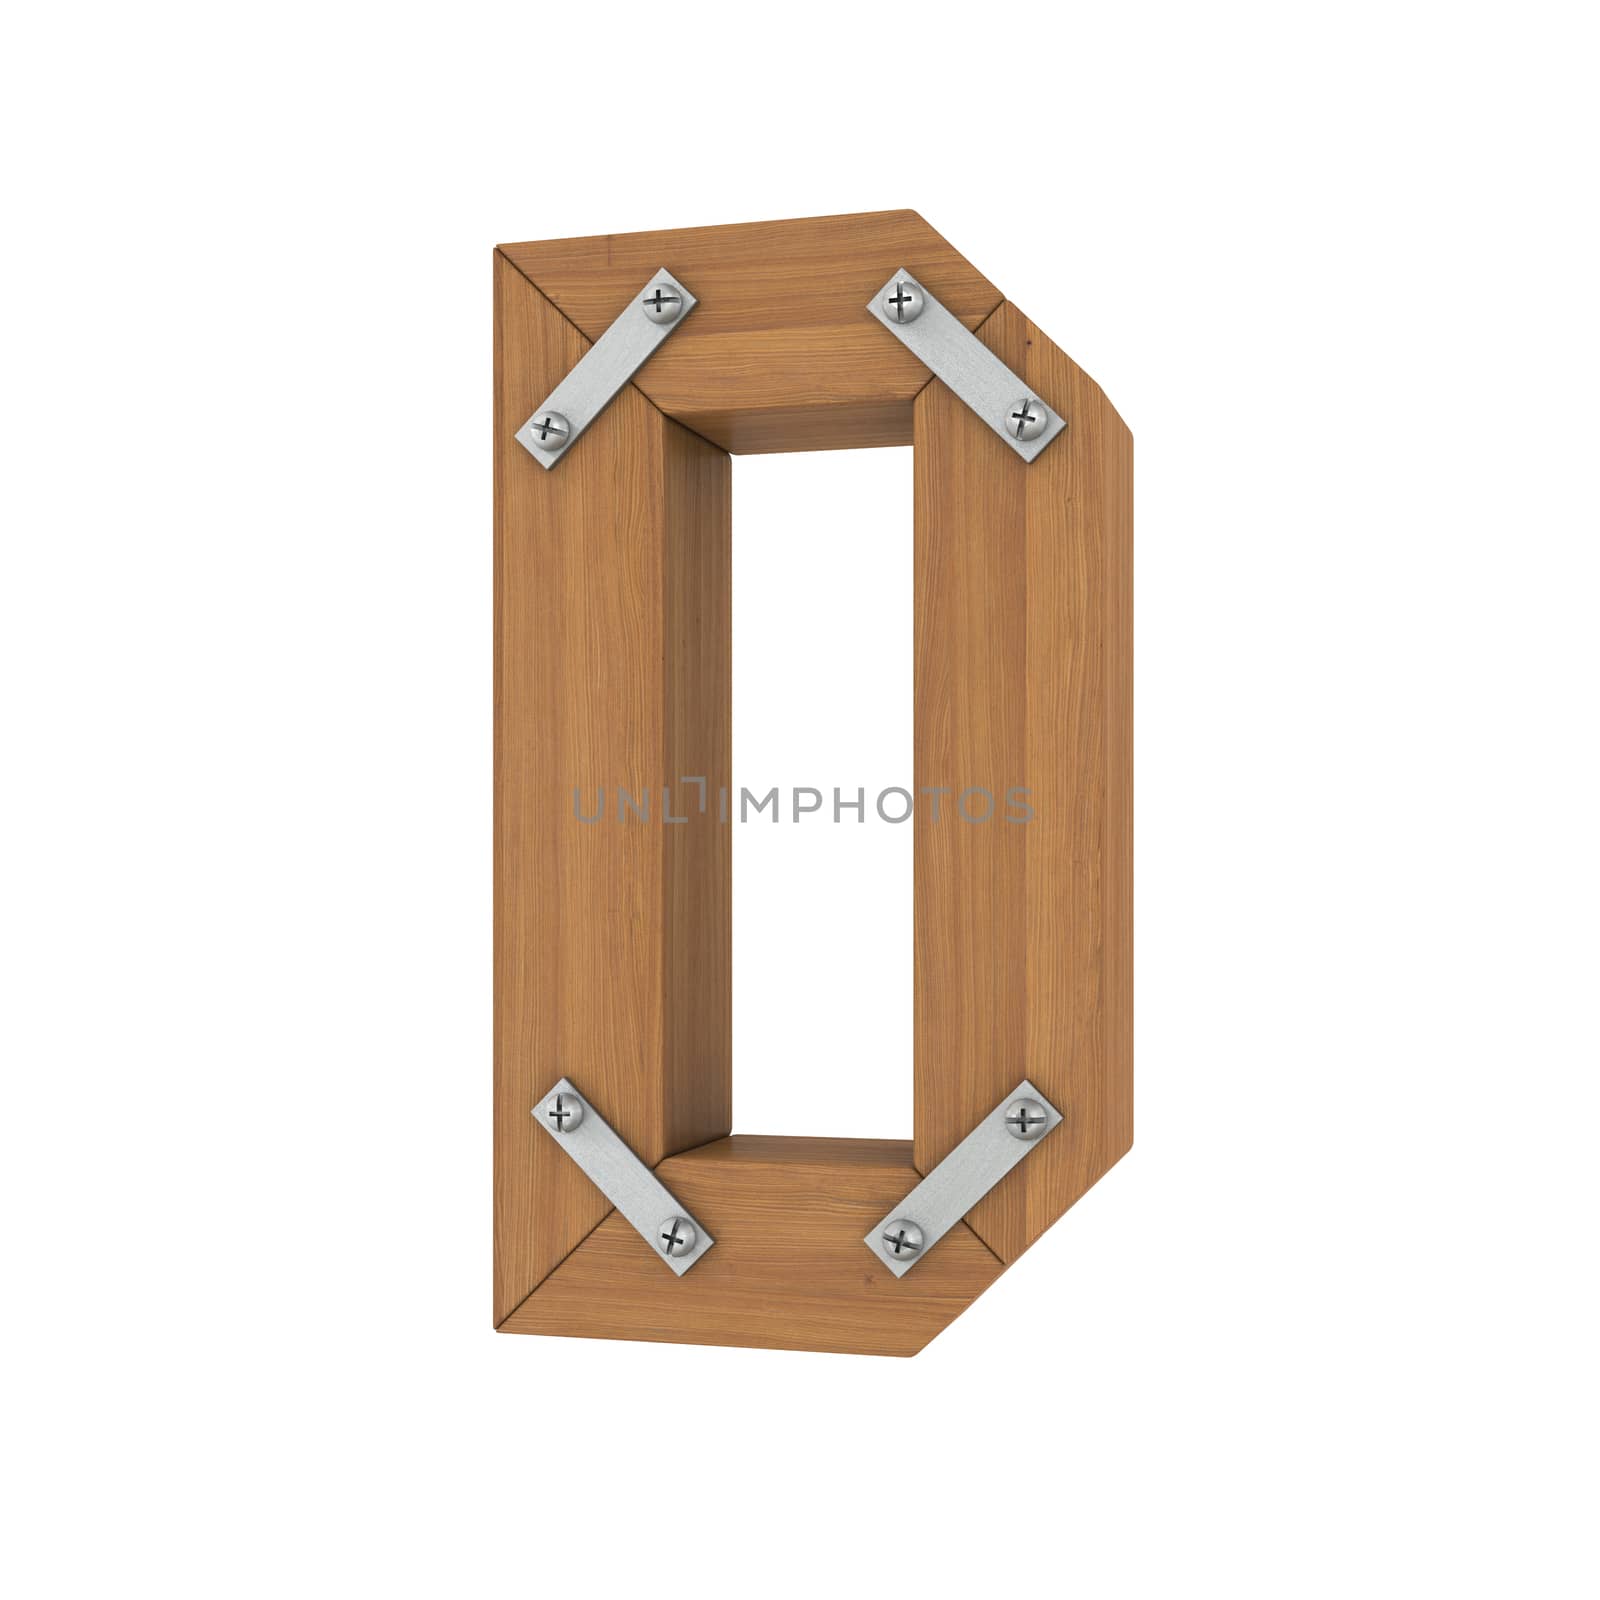 Wooden letter D by cherezoff